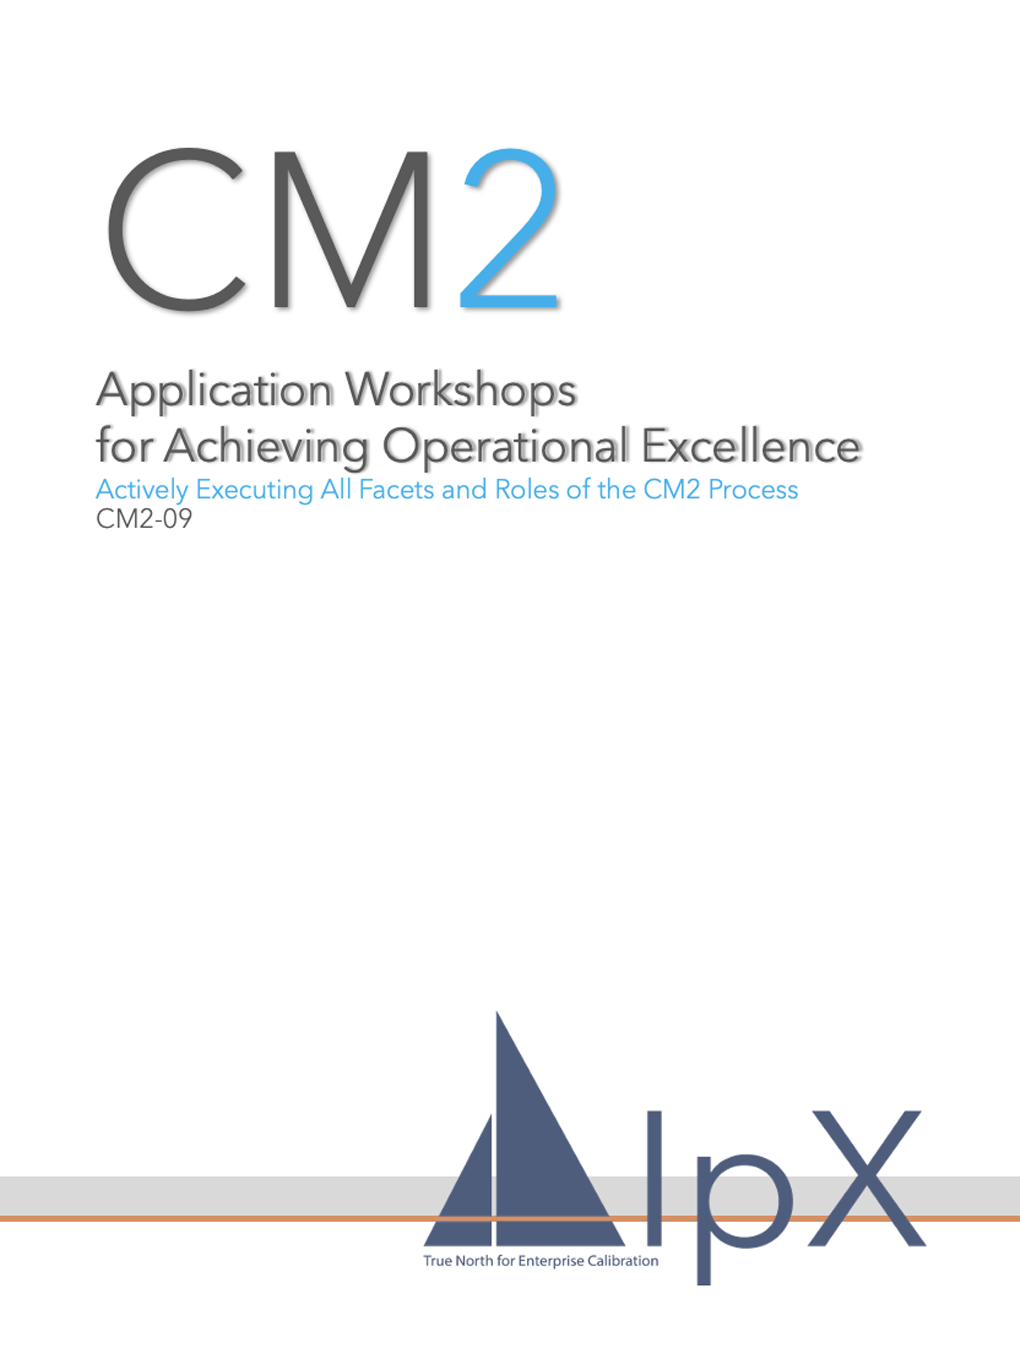 Application Workshops for Achieving Operational Excellence Course